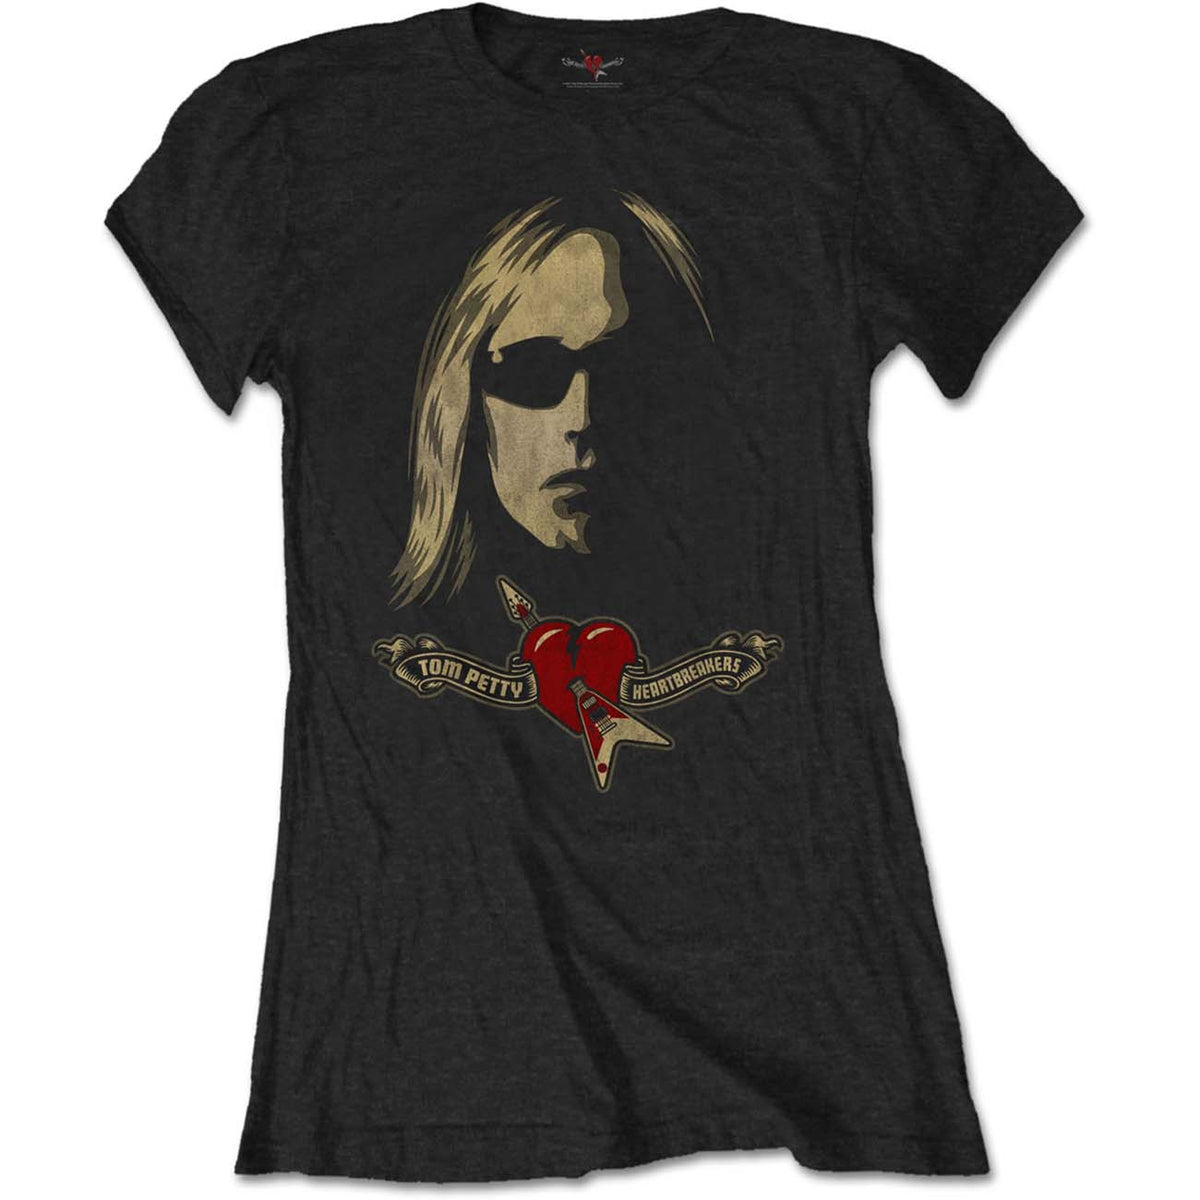 Tom Petty & the Heartbreakers Ladies T-Shirt - Shades Logo  - Official Product